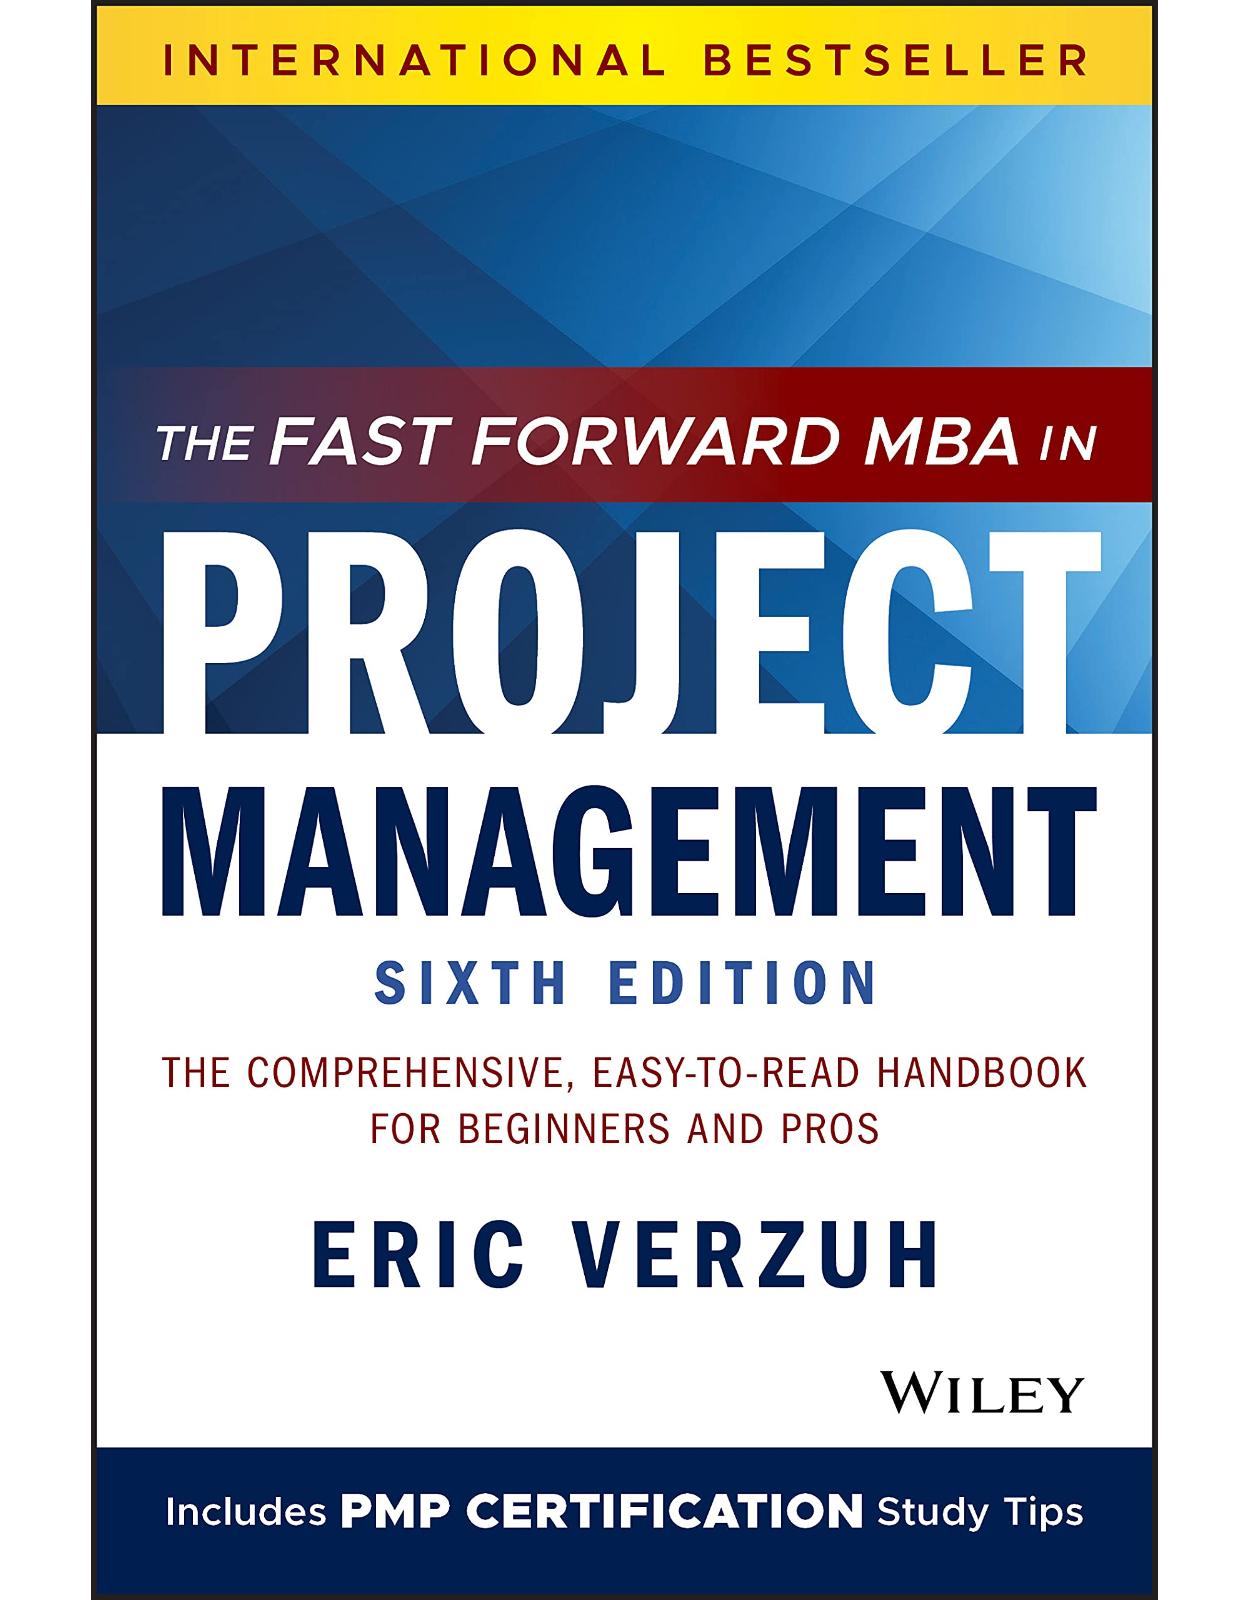 The Fast Forward MBA in Project Management: The Comprehensive, Easy-to-Read Handbook for Beginners and Pros, 6th Edition